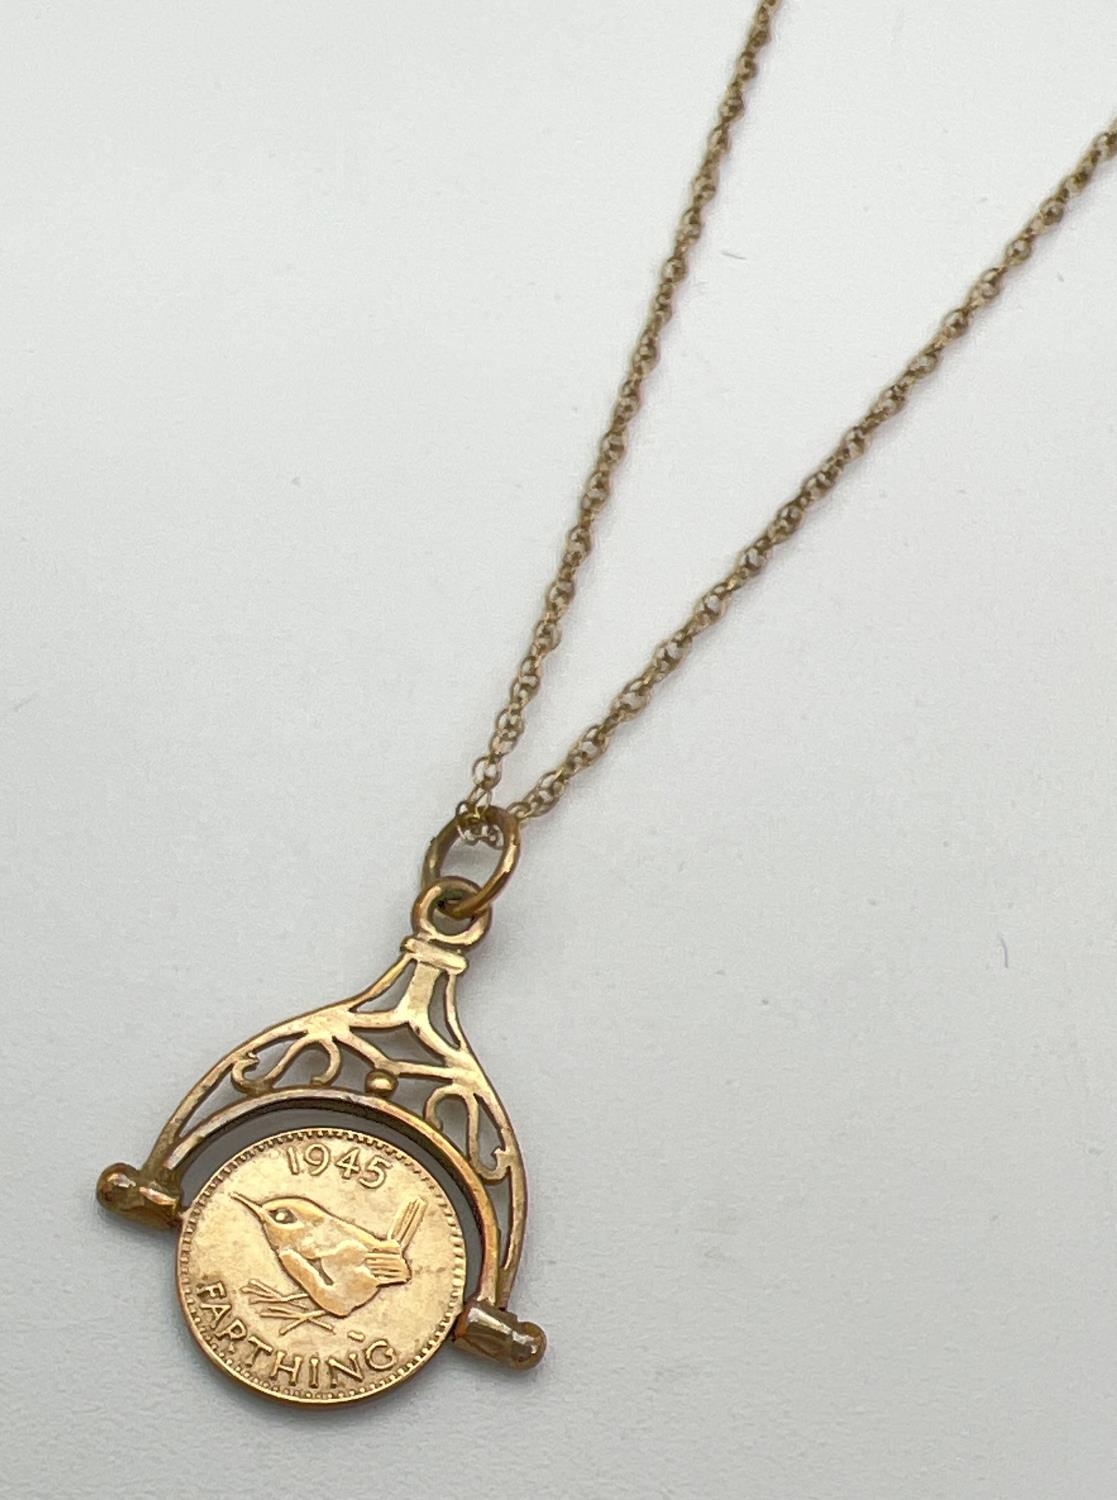 A 9ct gold George VI spinning farthing pendant on a 16" double belcher chain with spring ring clasp. - Image 2 of 3